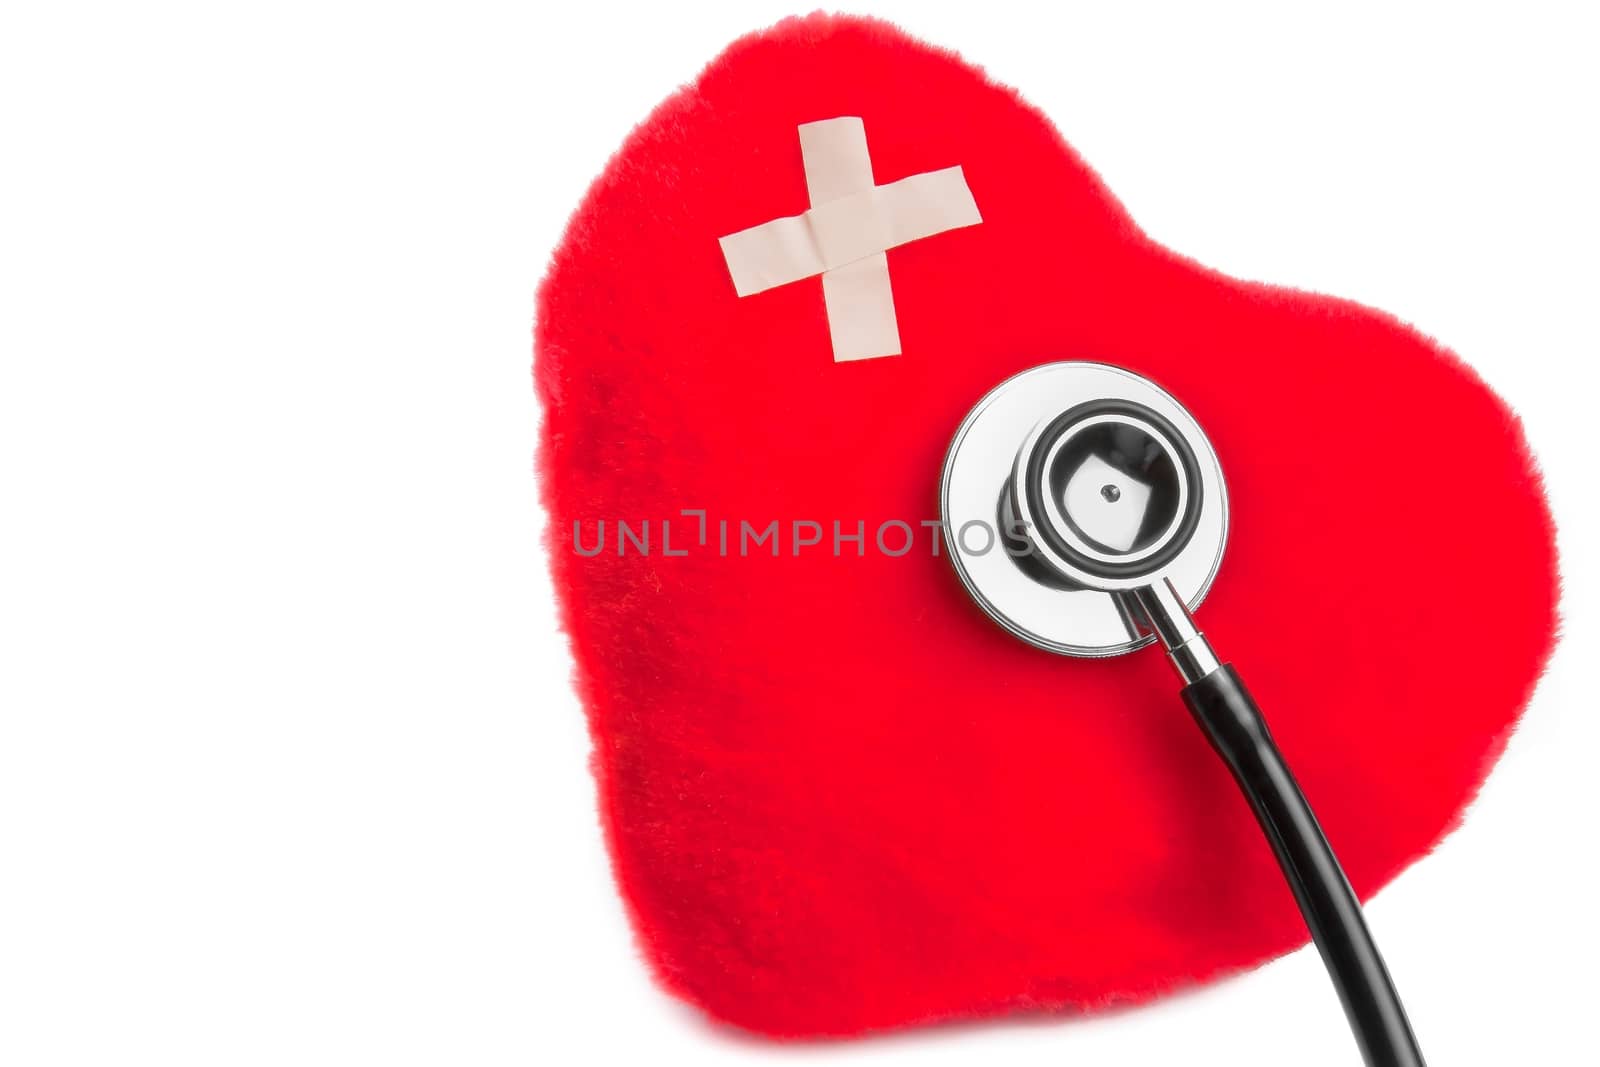 heart of cuddly toys with patch near stethoscope on white background with space for text